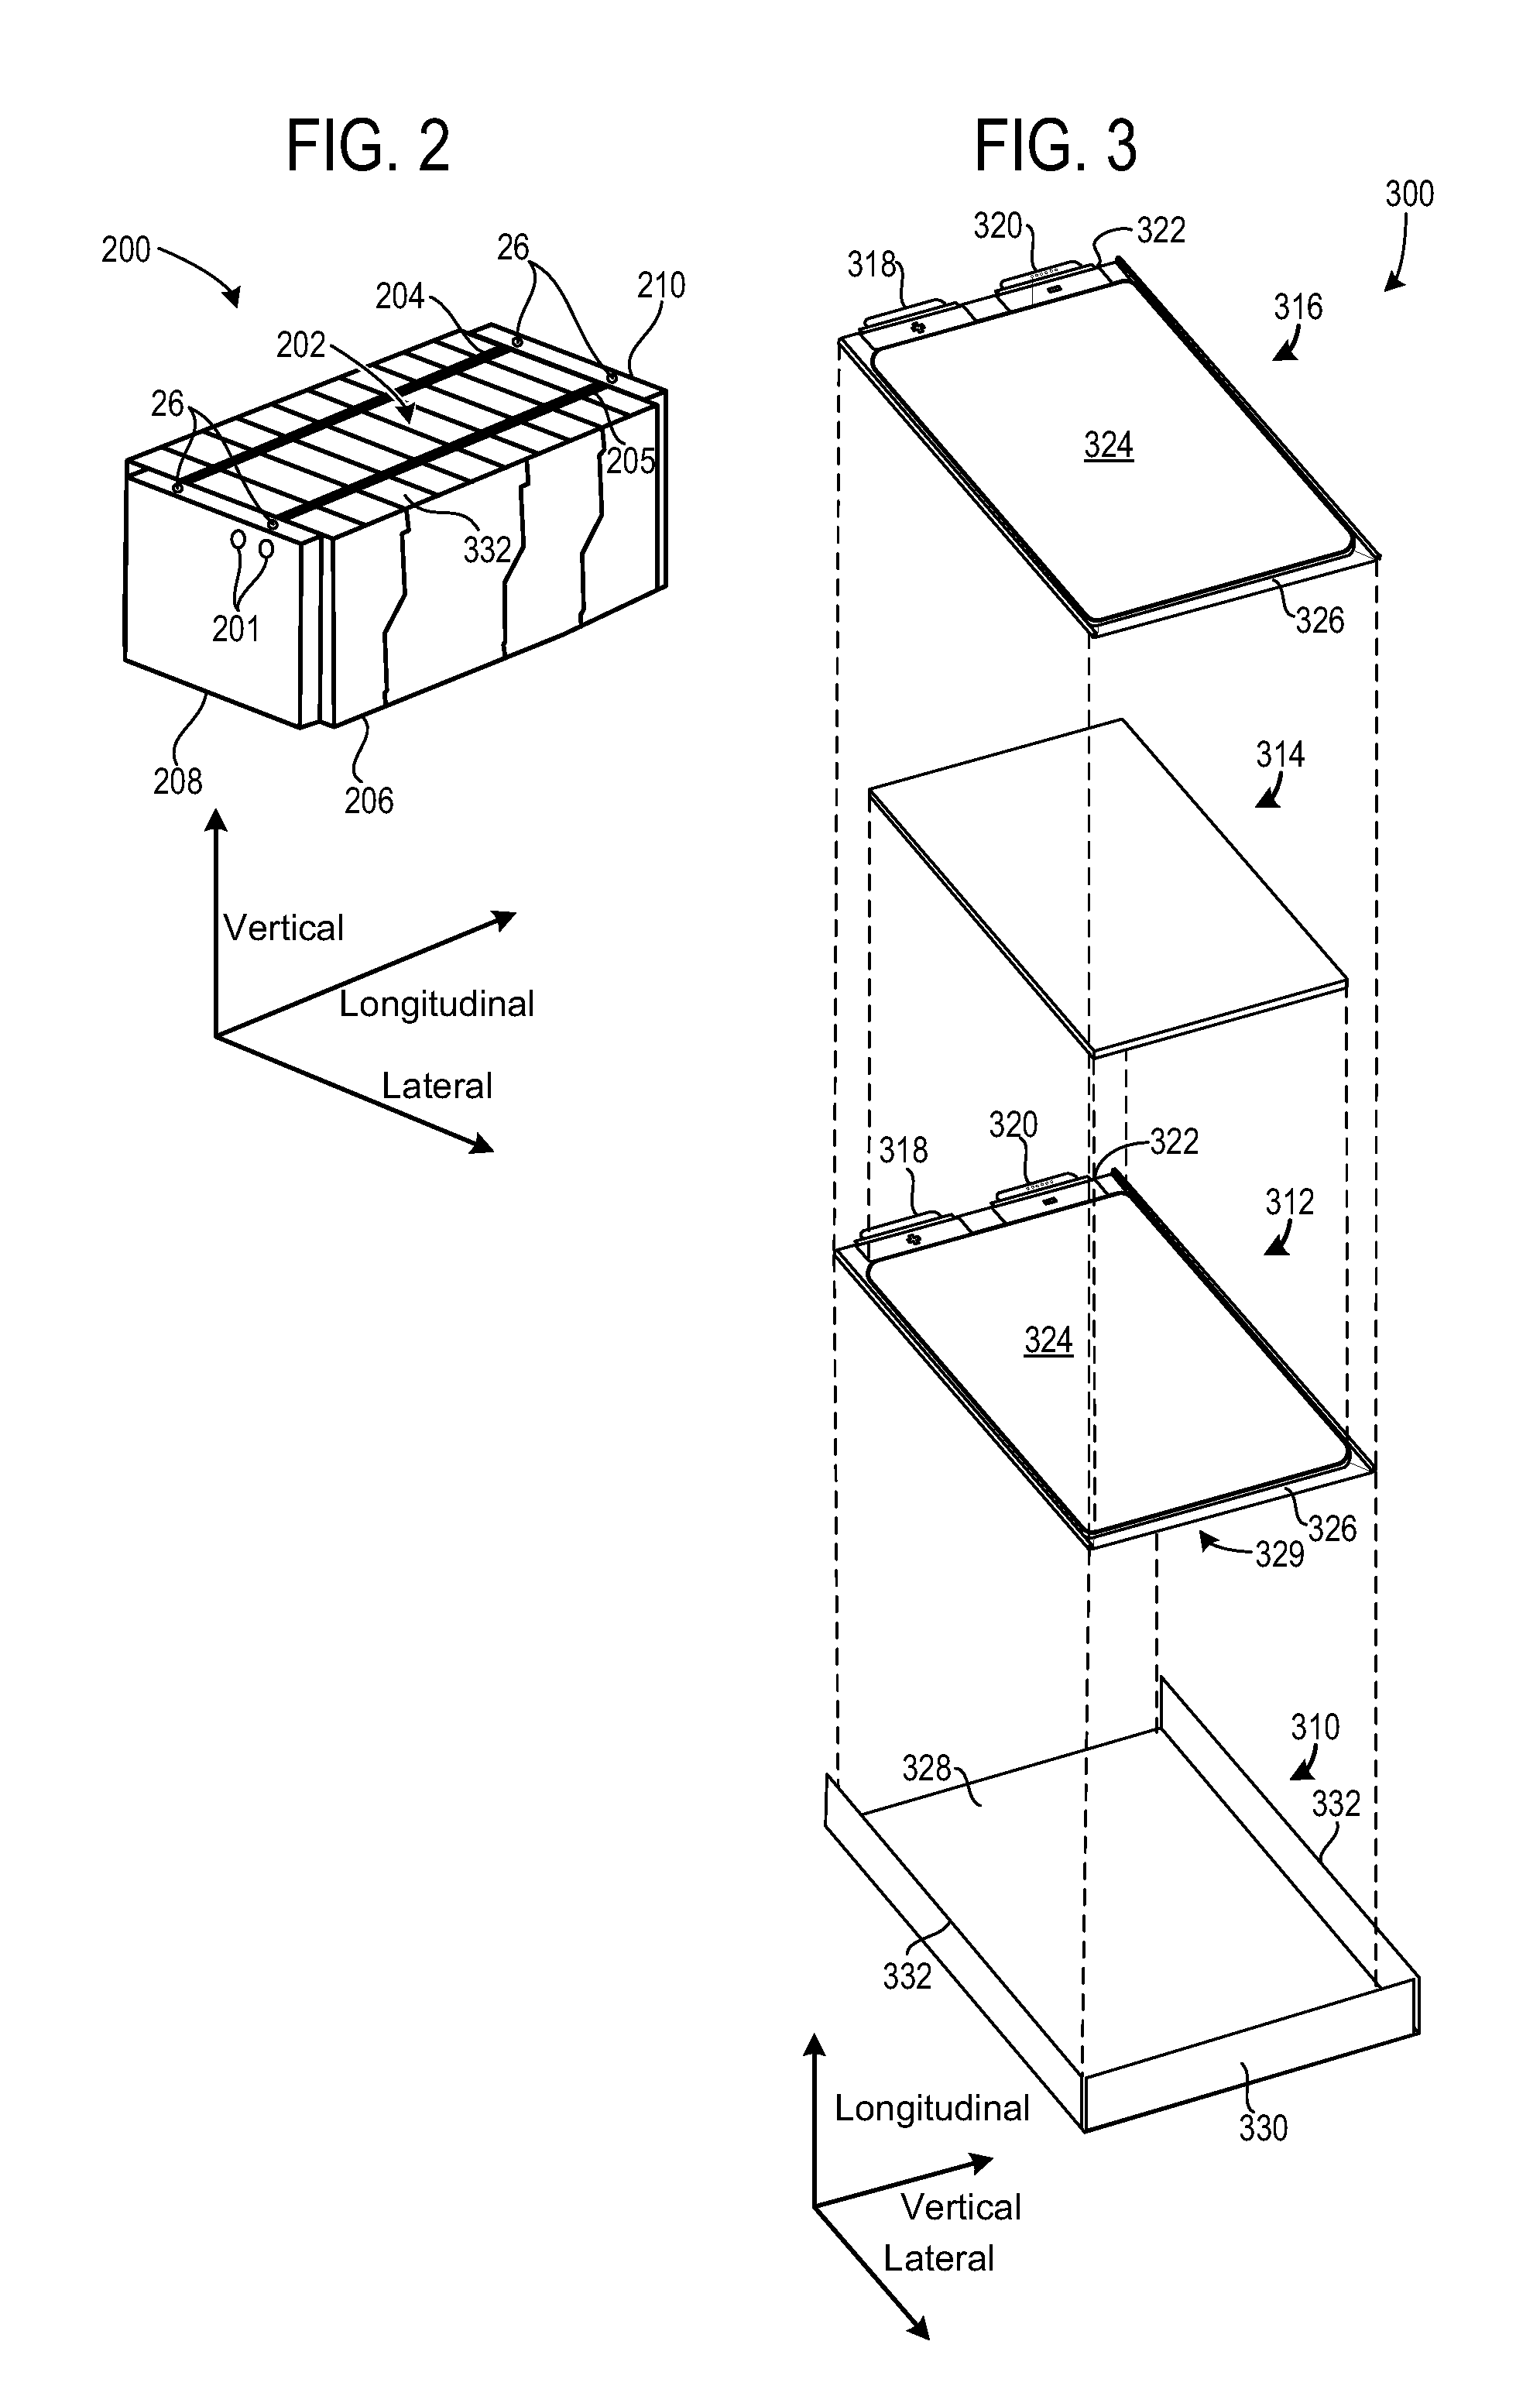 System and method for extending the usable capacity of a battery pack via controlling battery current through different current paths